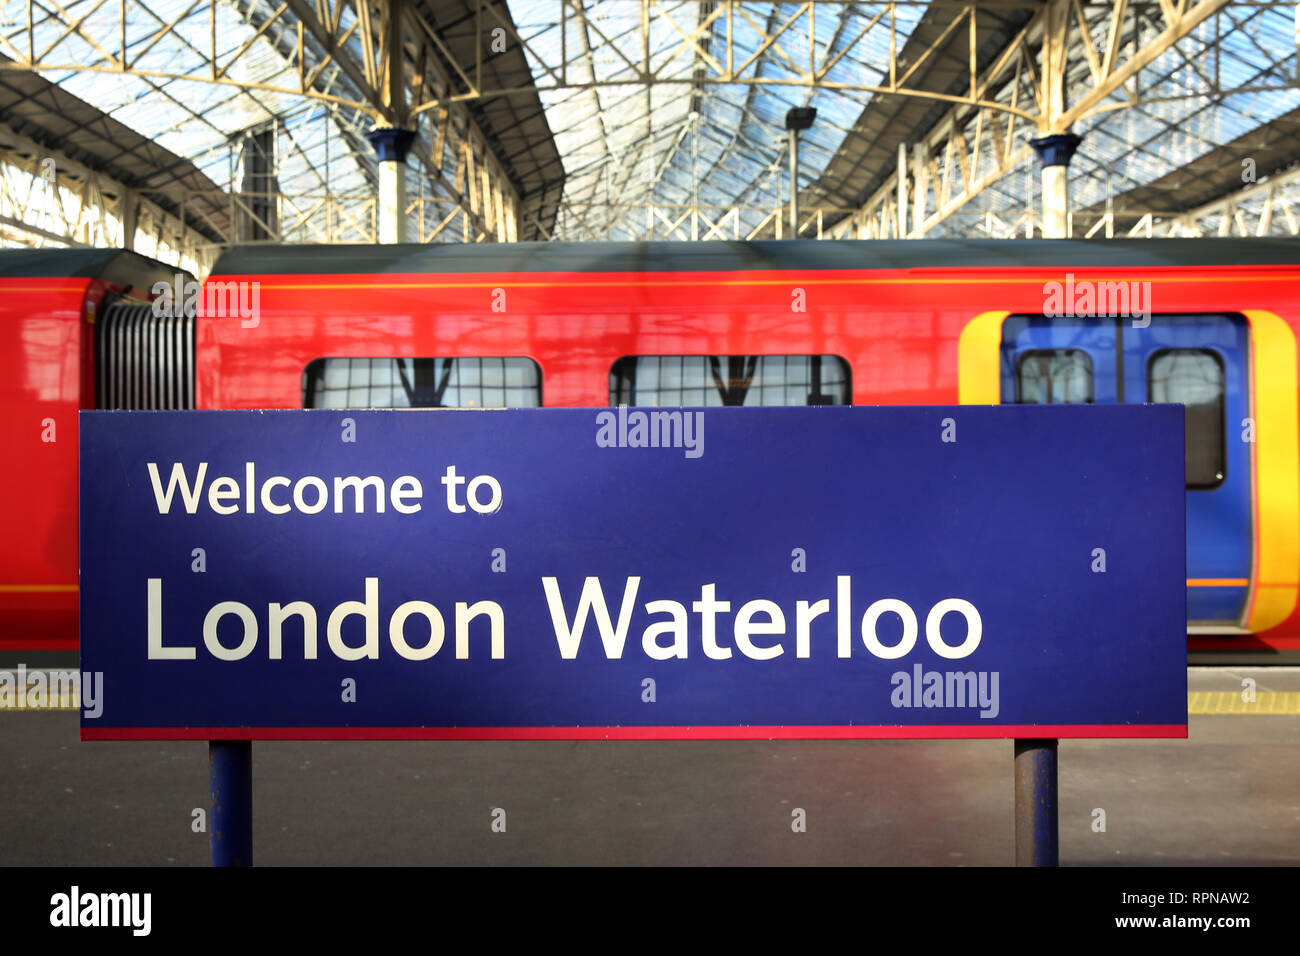 London Waterloo station with some trains in the background, England. Stock Photo